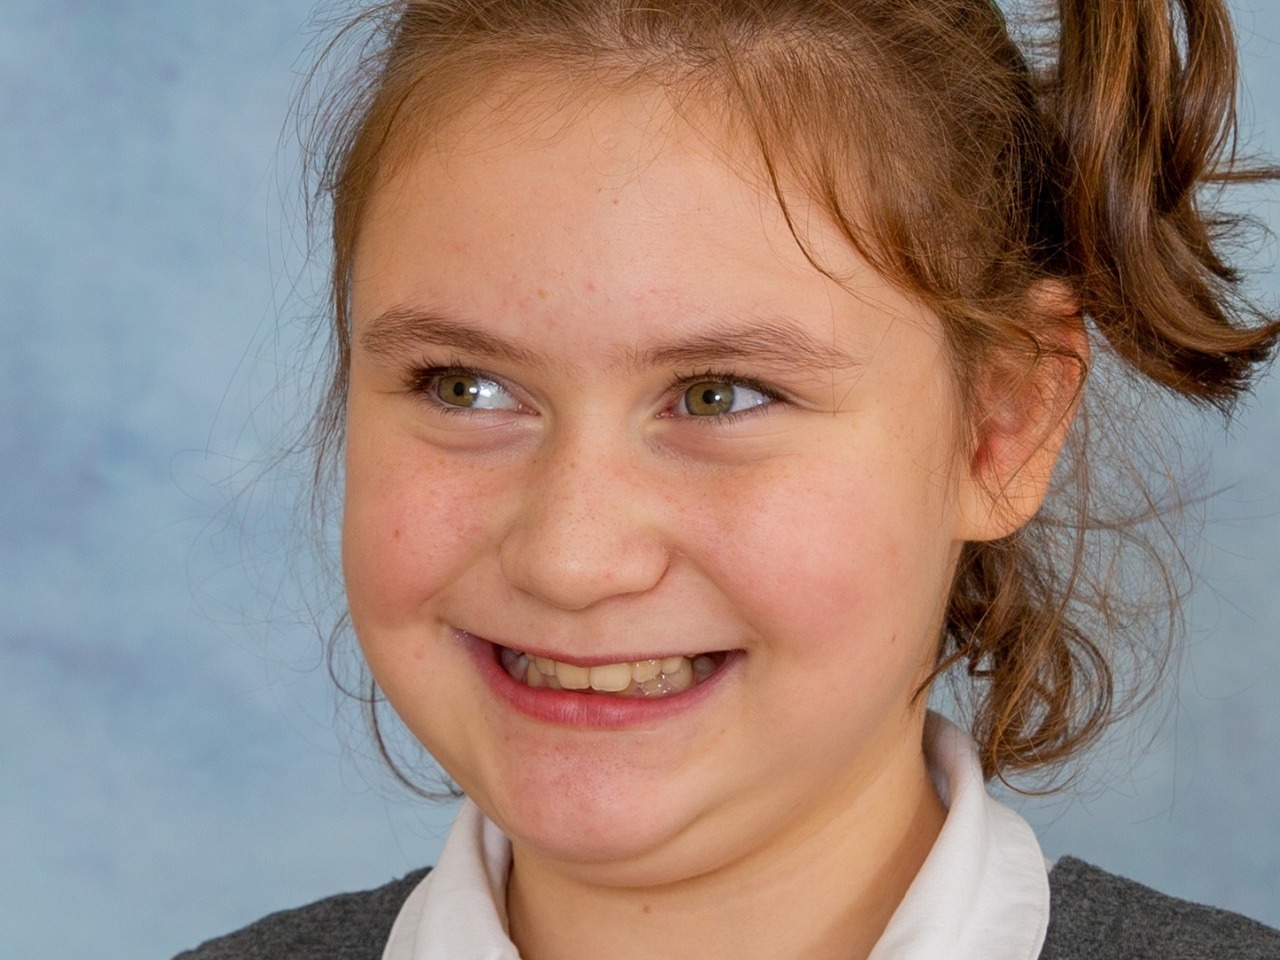 Cheeky smile from this adorable young girl with complex needs having her school photograph